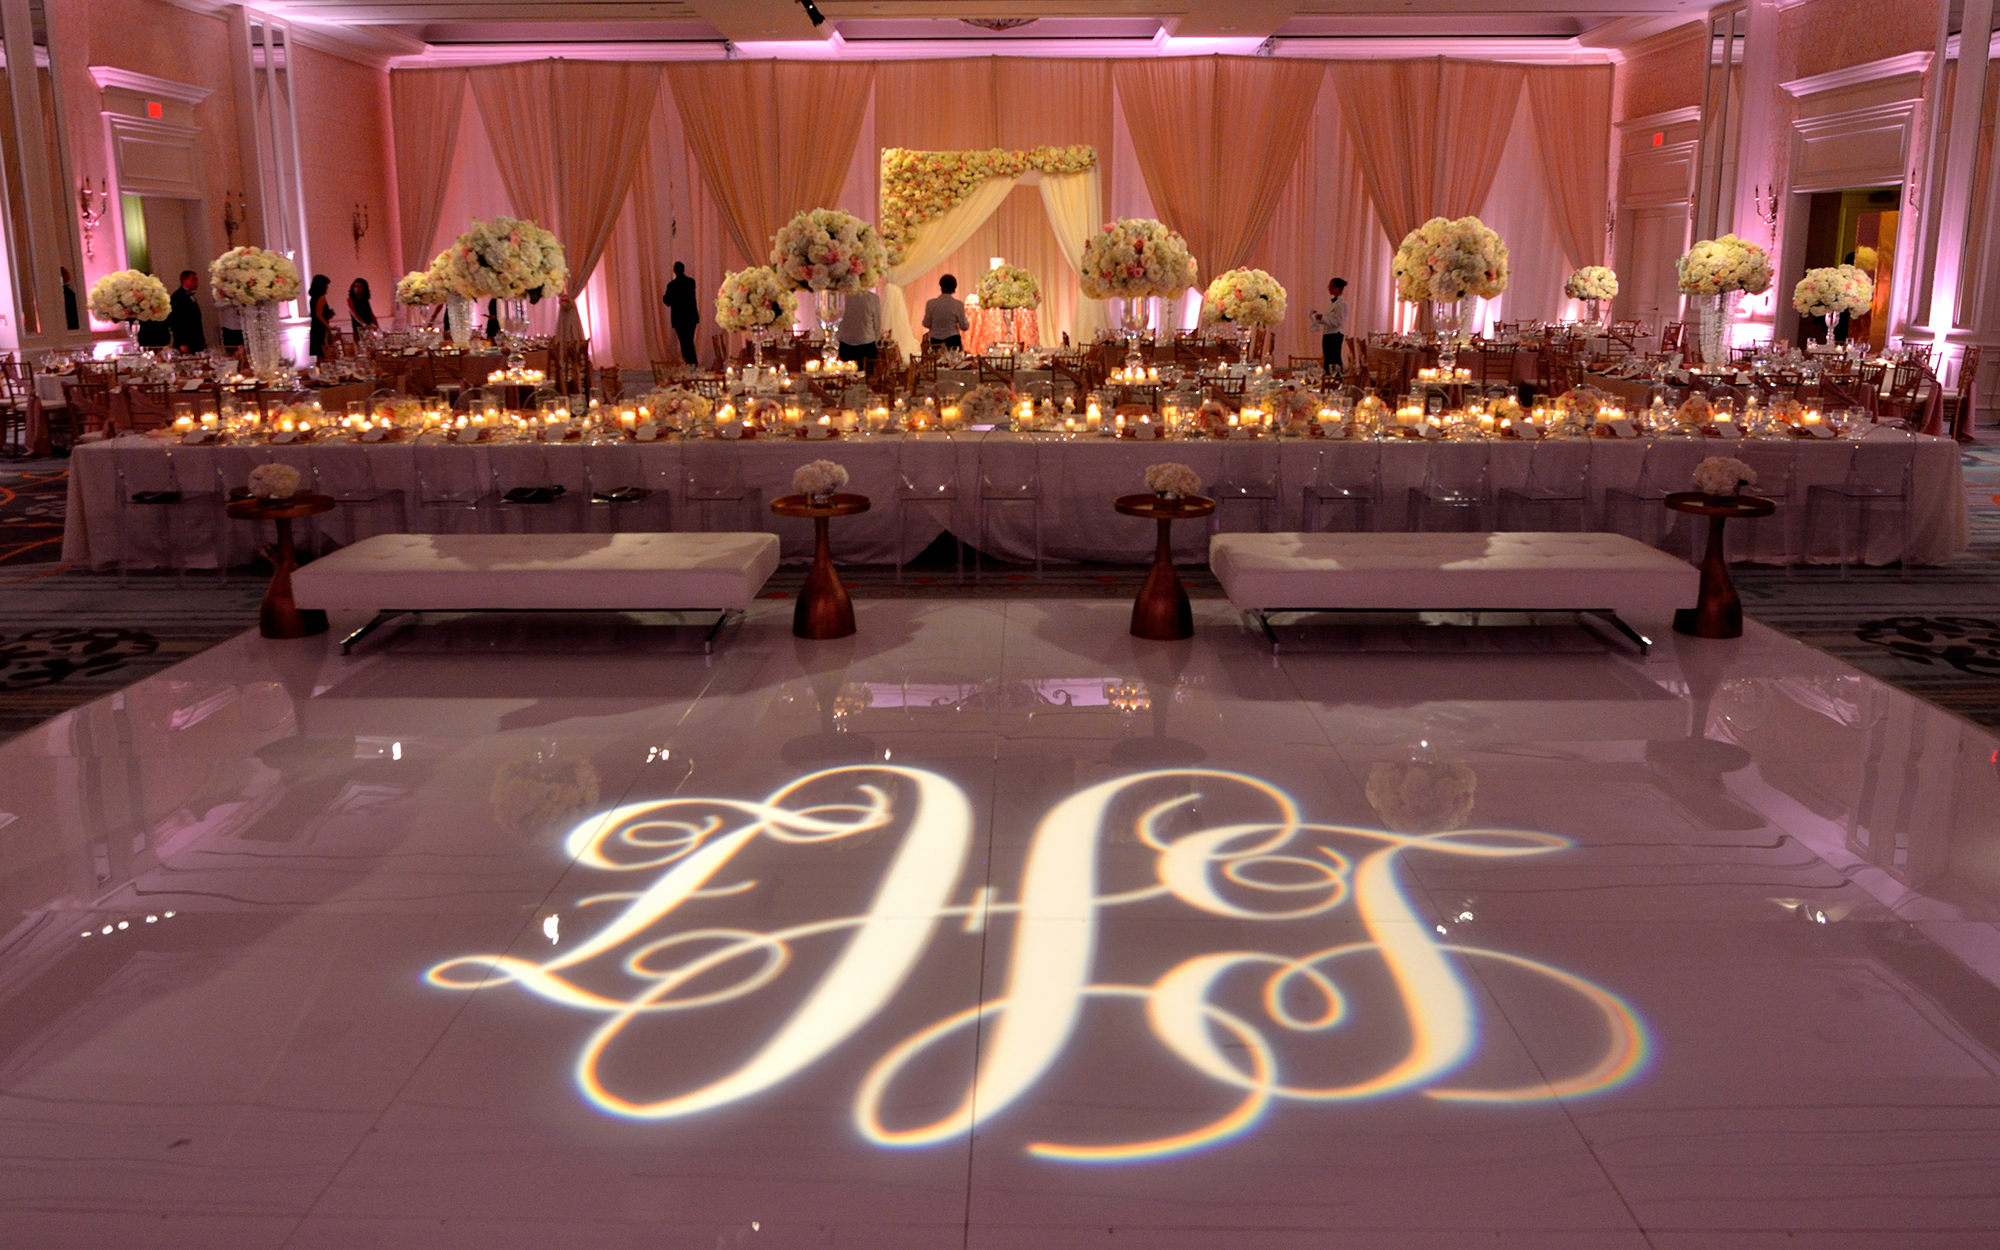 Gobo Projected onto Dance Floor at The Four Seasons Las Colinas